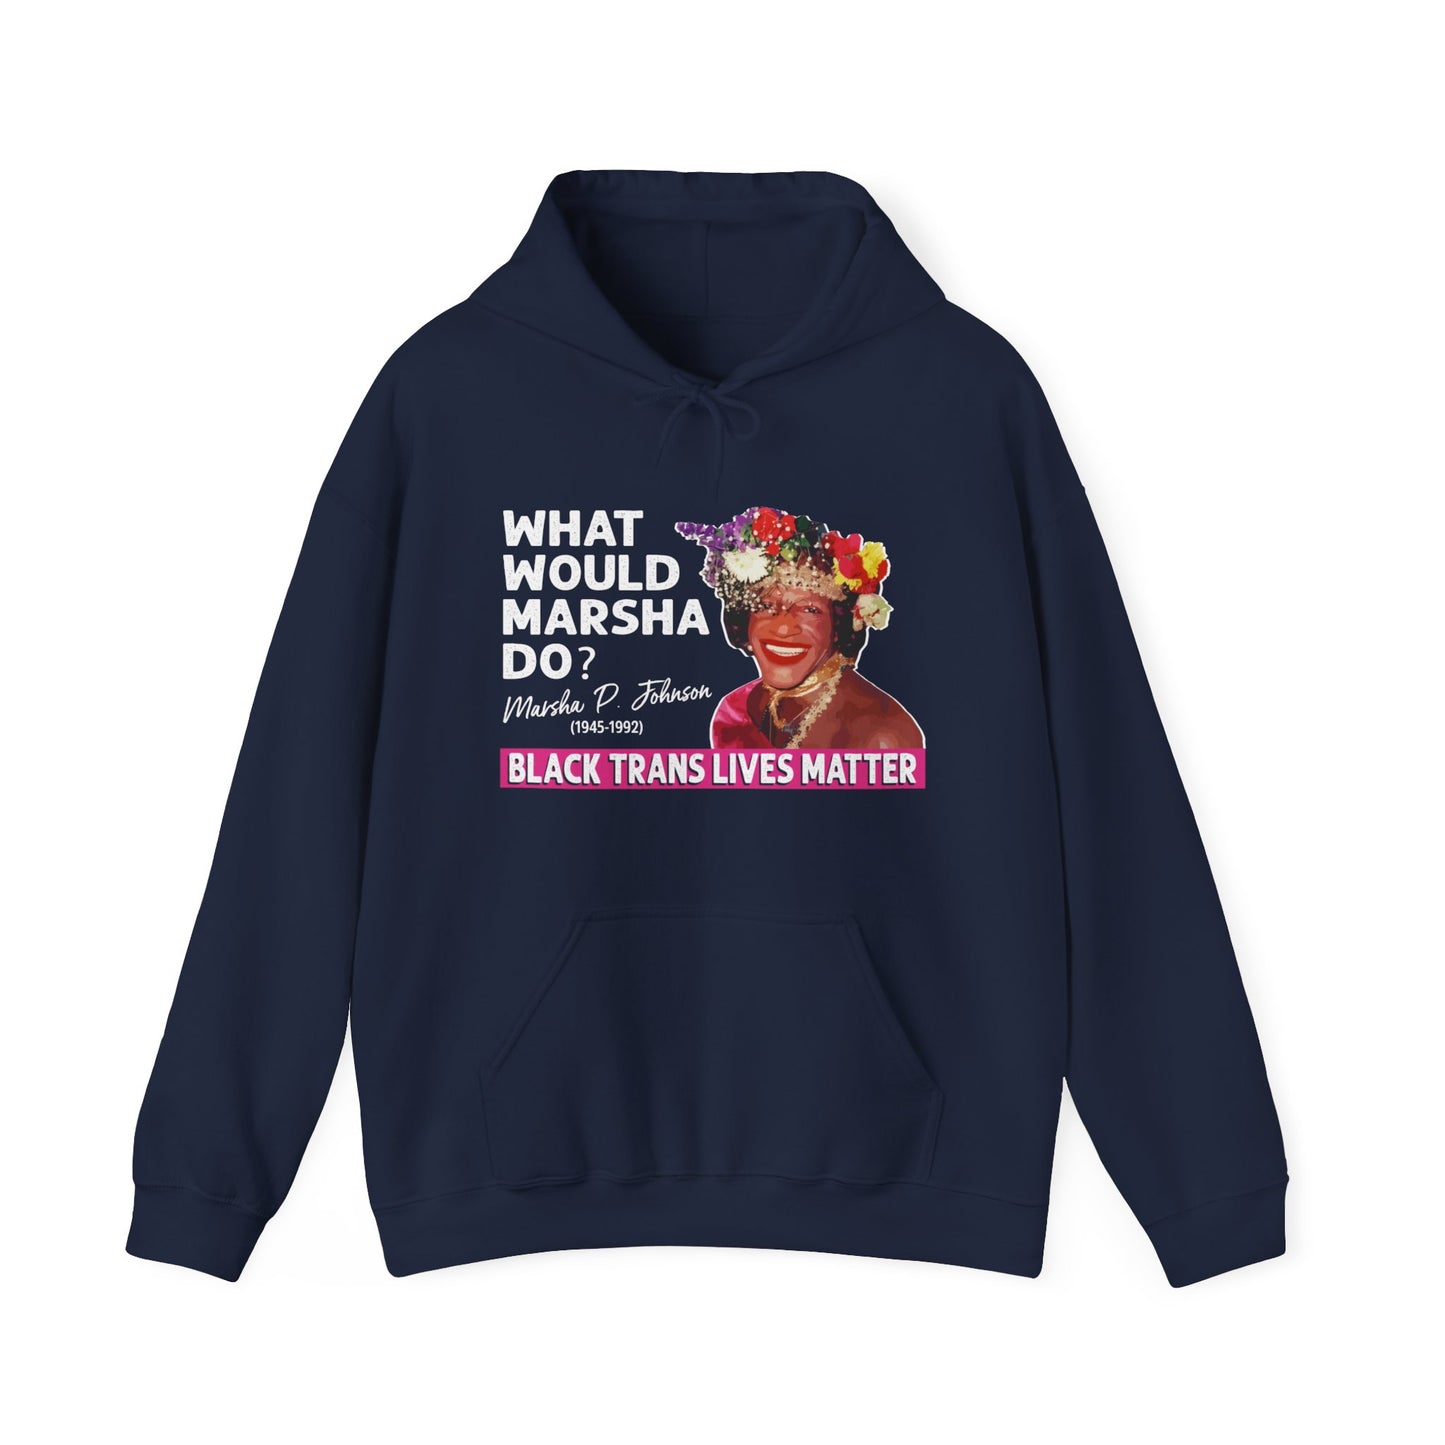 “What Would Marsha Do?” Unisex Hoodie